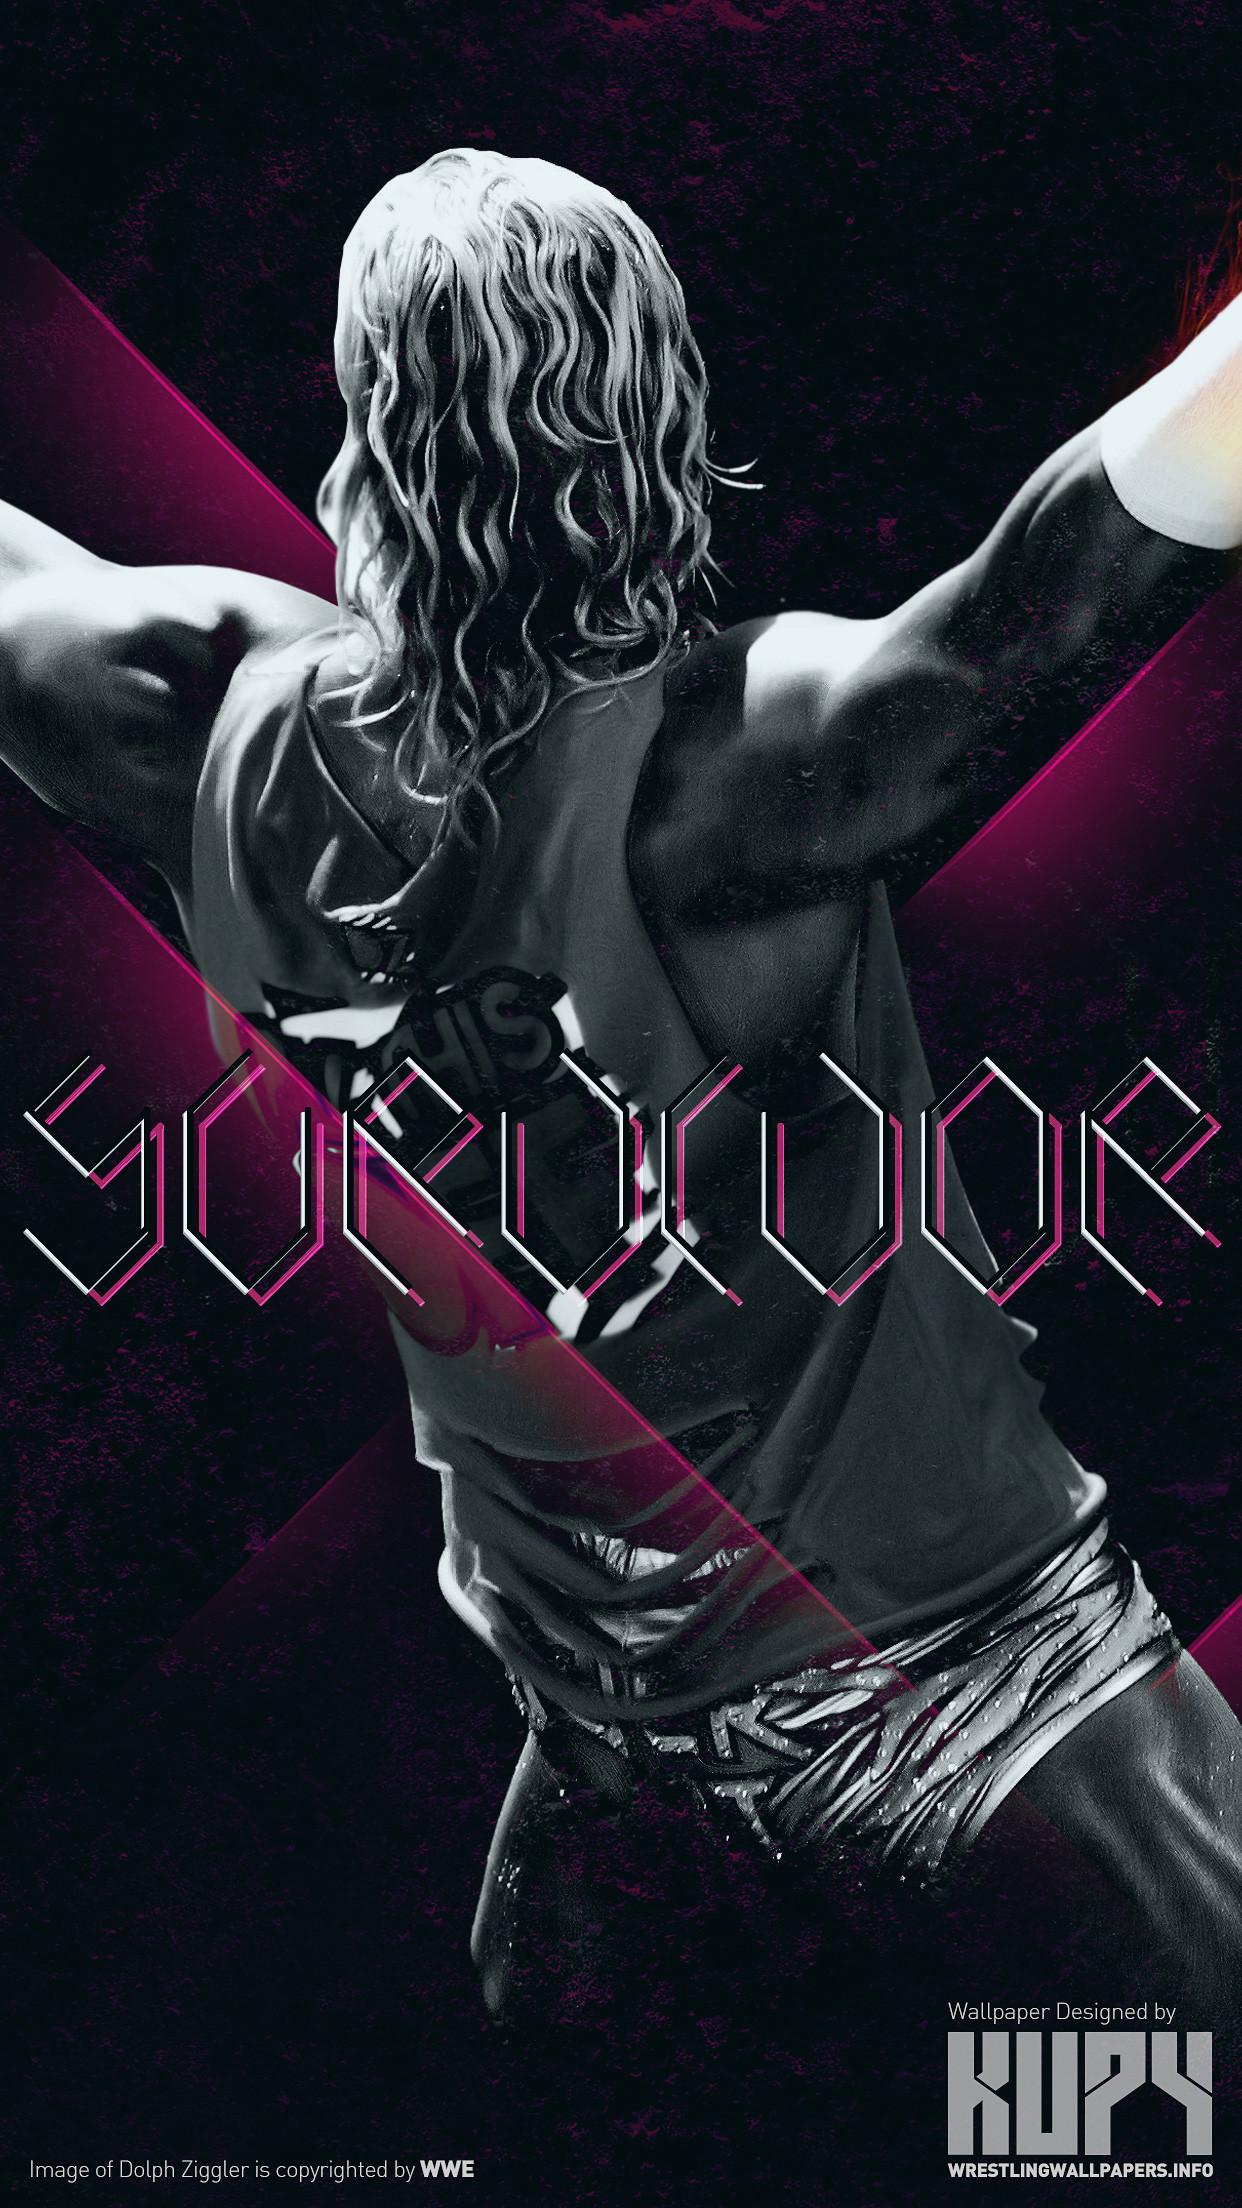 Wwe iPhone wallpapers